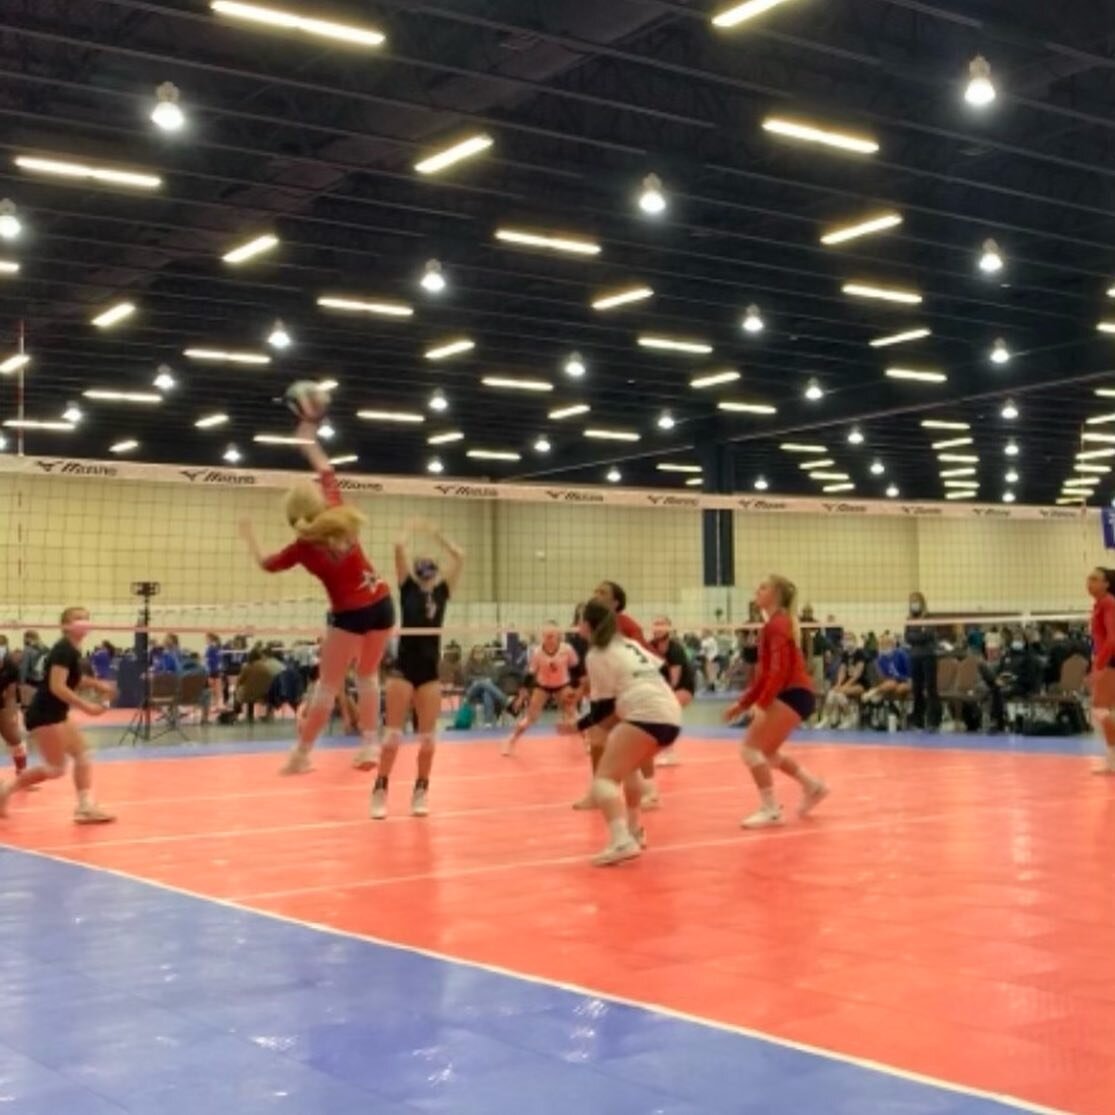 Congratulations 15 White! They are going to the gold bracket tomorrow! Great job today and good luck tomorrow! #k2volleyball #volleyball #volleyballplayer #roanokeunited